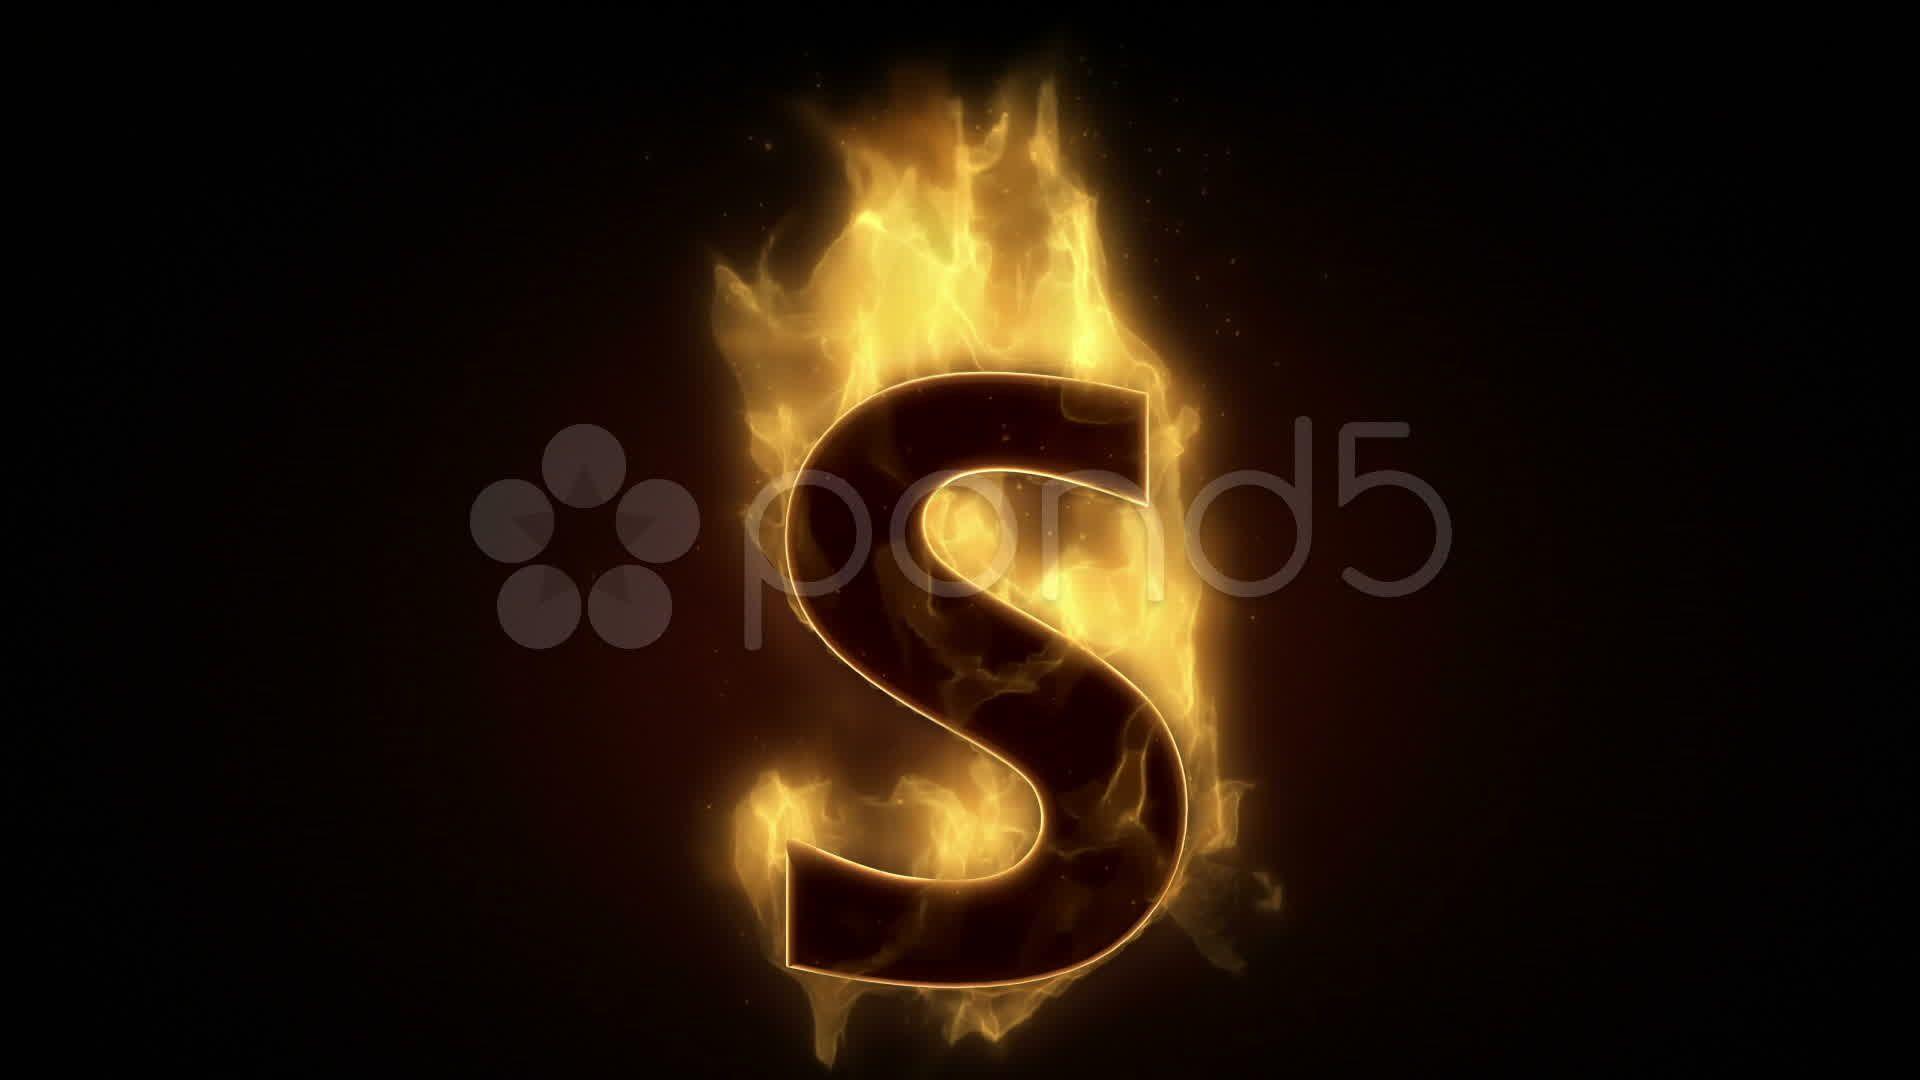 S Letter Wallpapers HD For Mobile - Wallpaper Cave